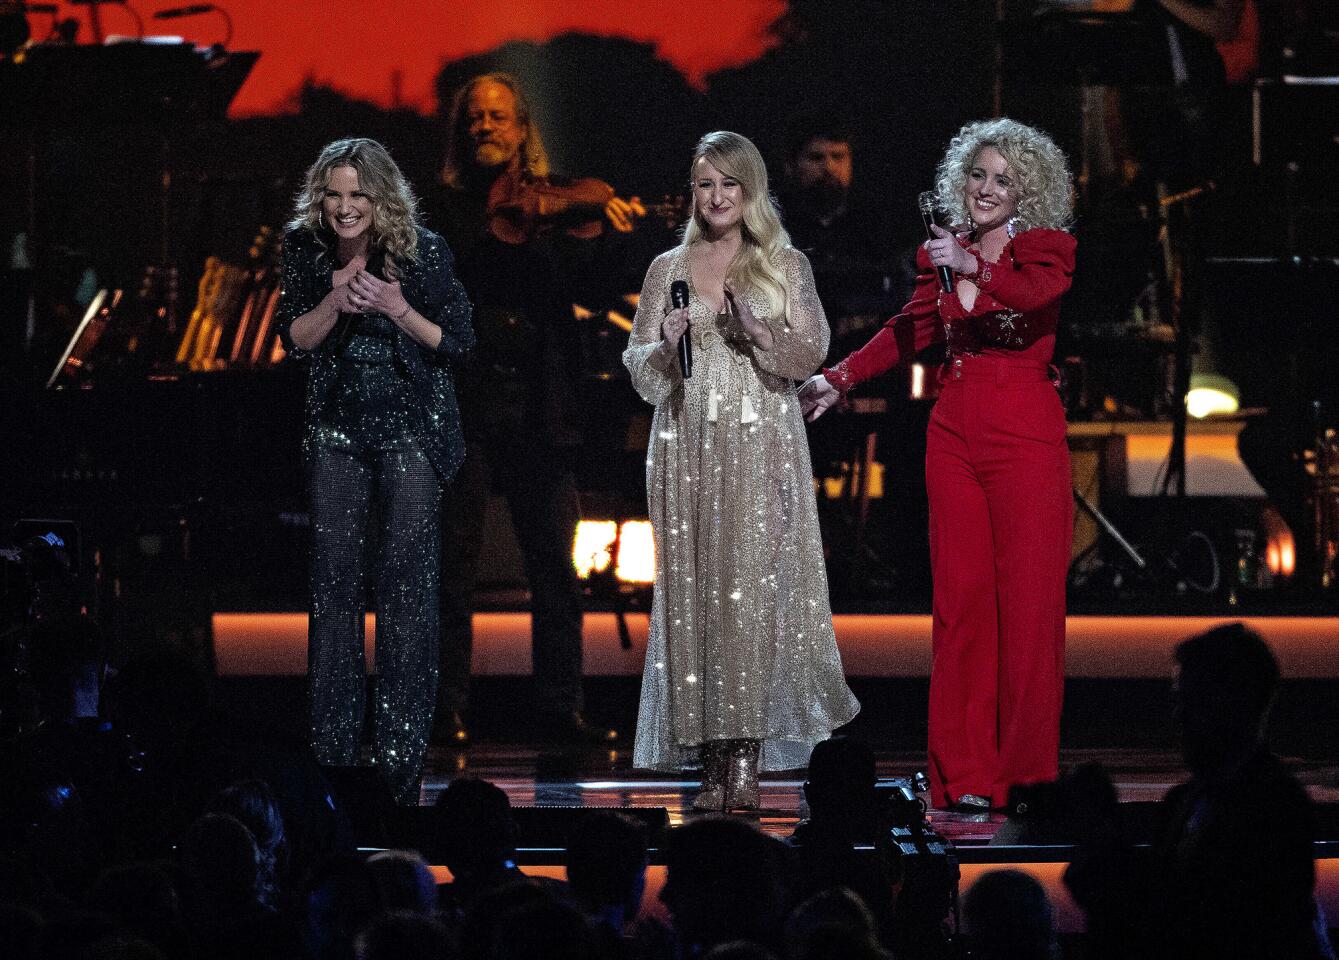 MusiCares salutes Dolly Parton on Grammy weekend